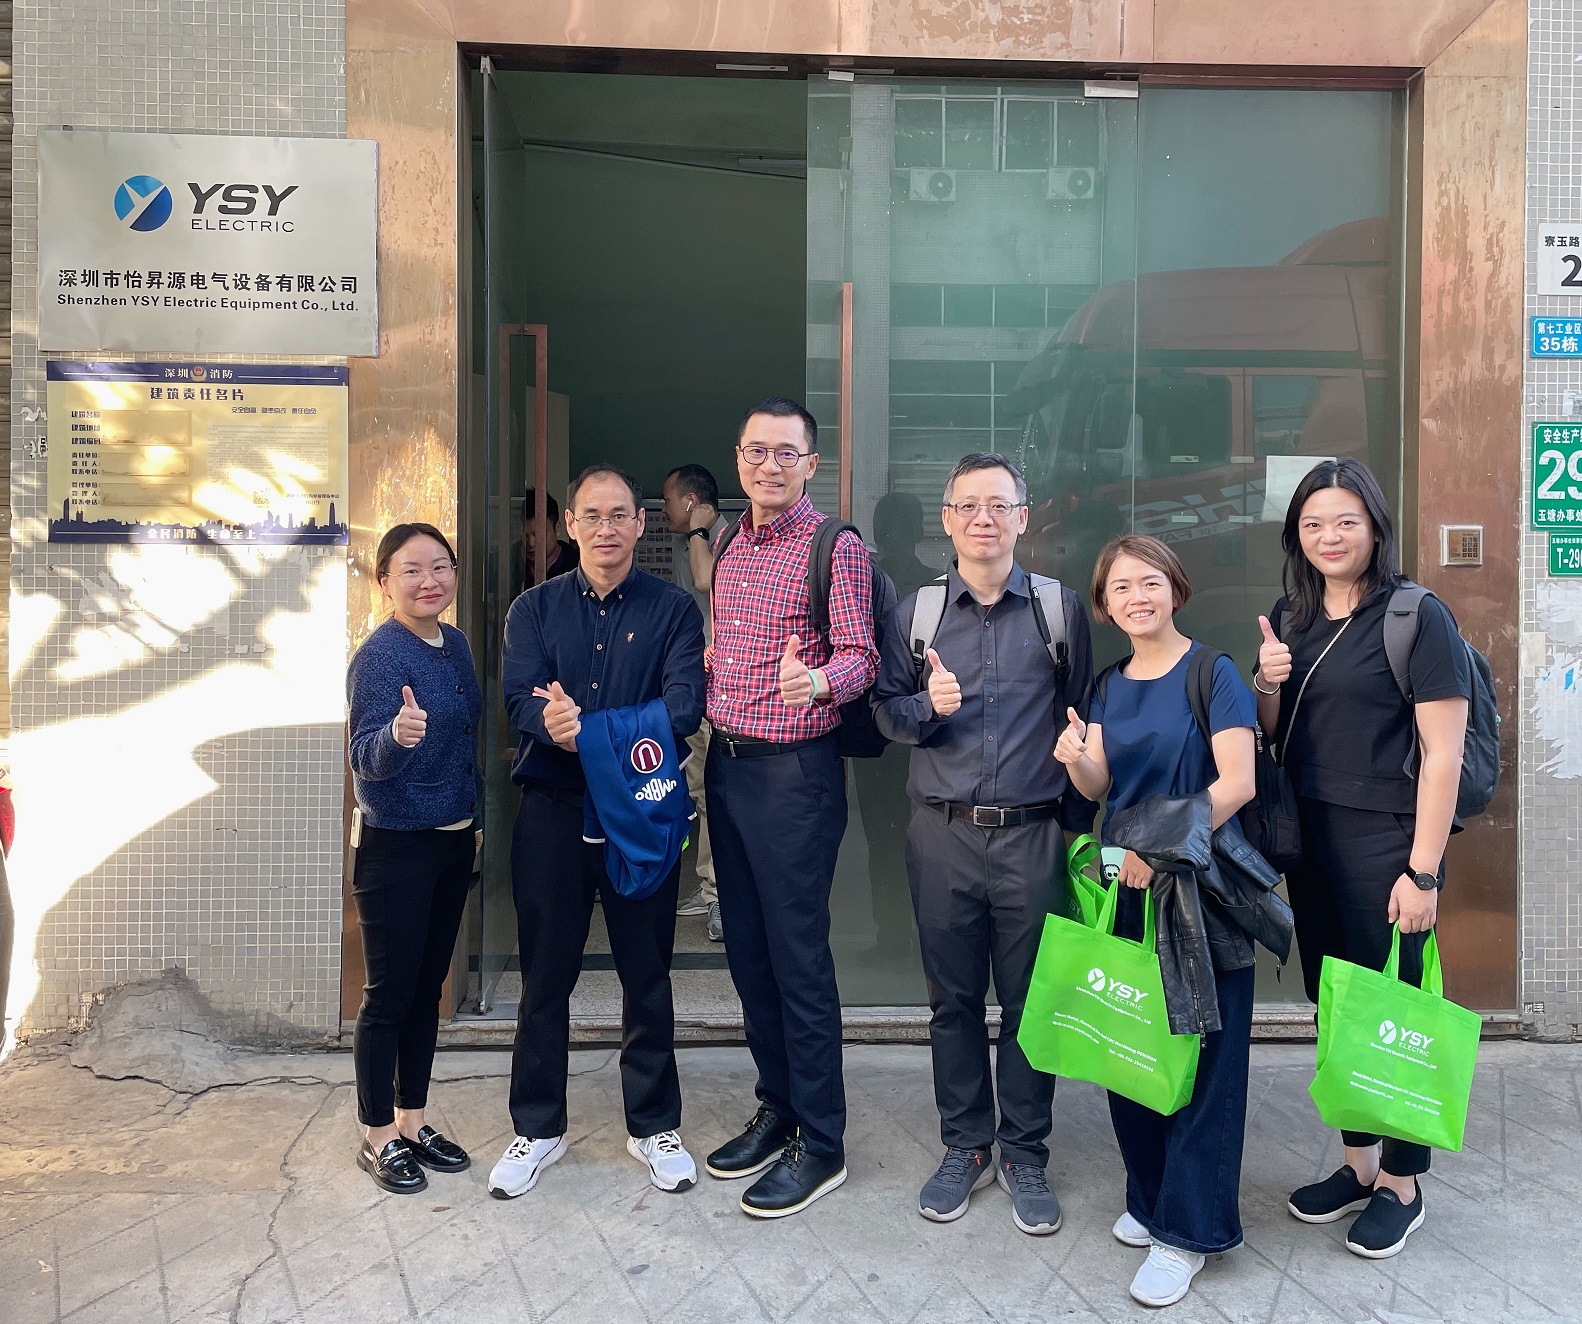 Warmly welcome our new Taiwan partners to visit YSY